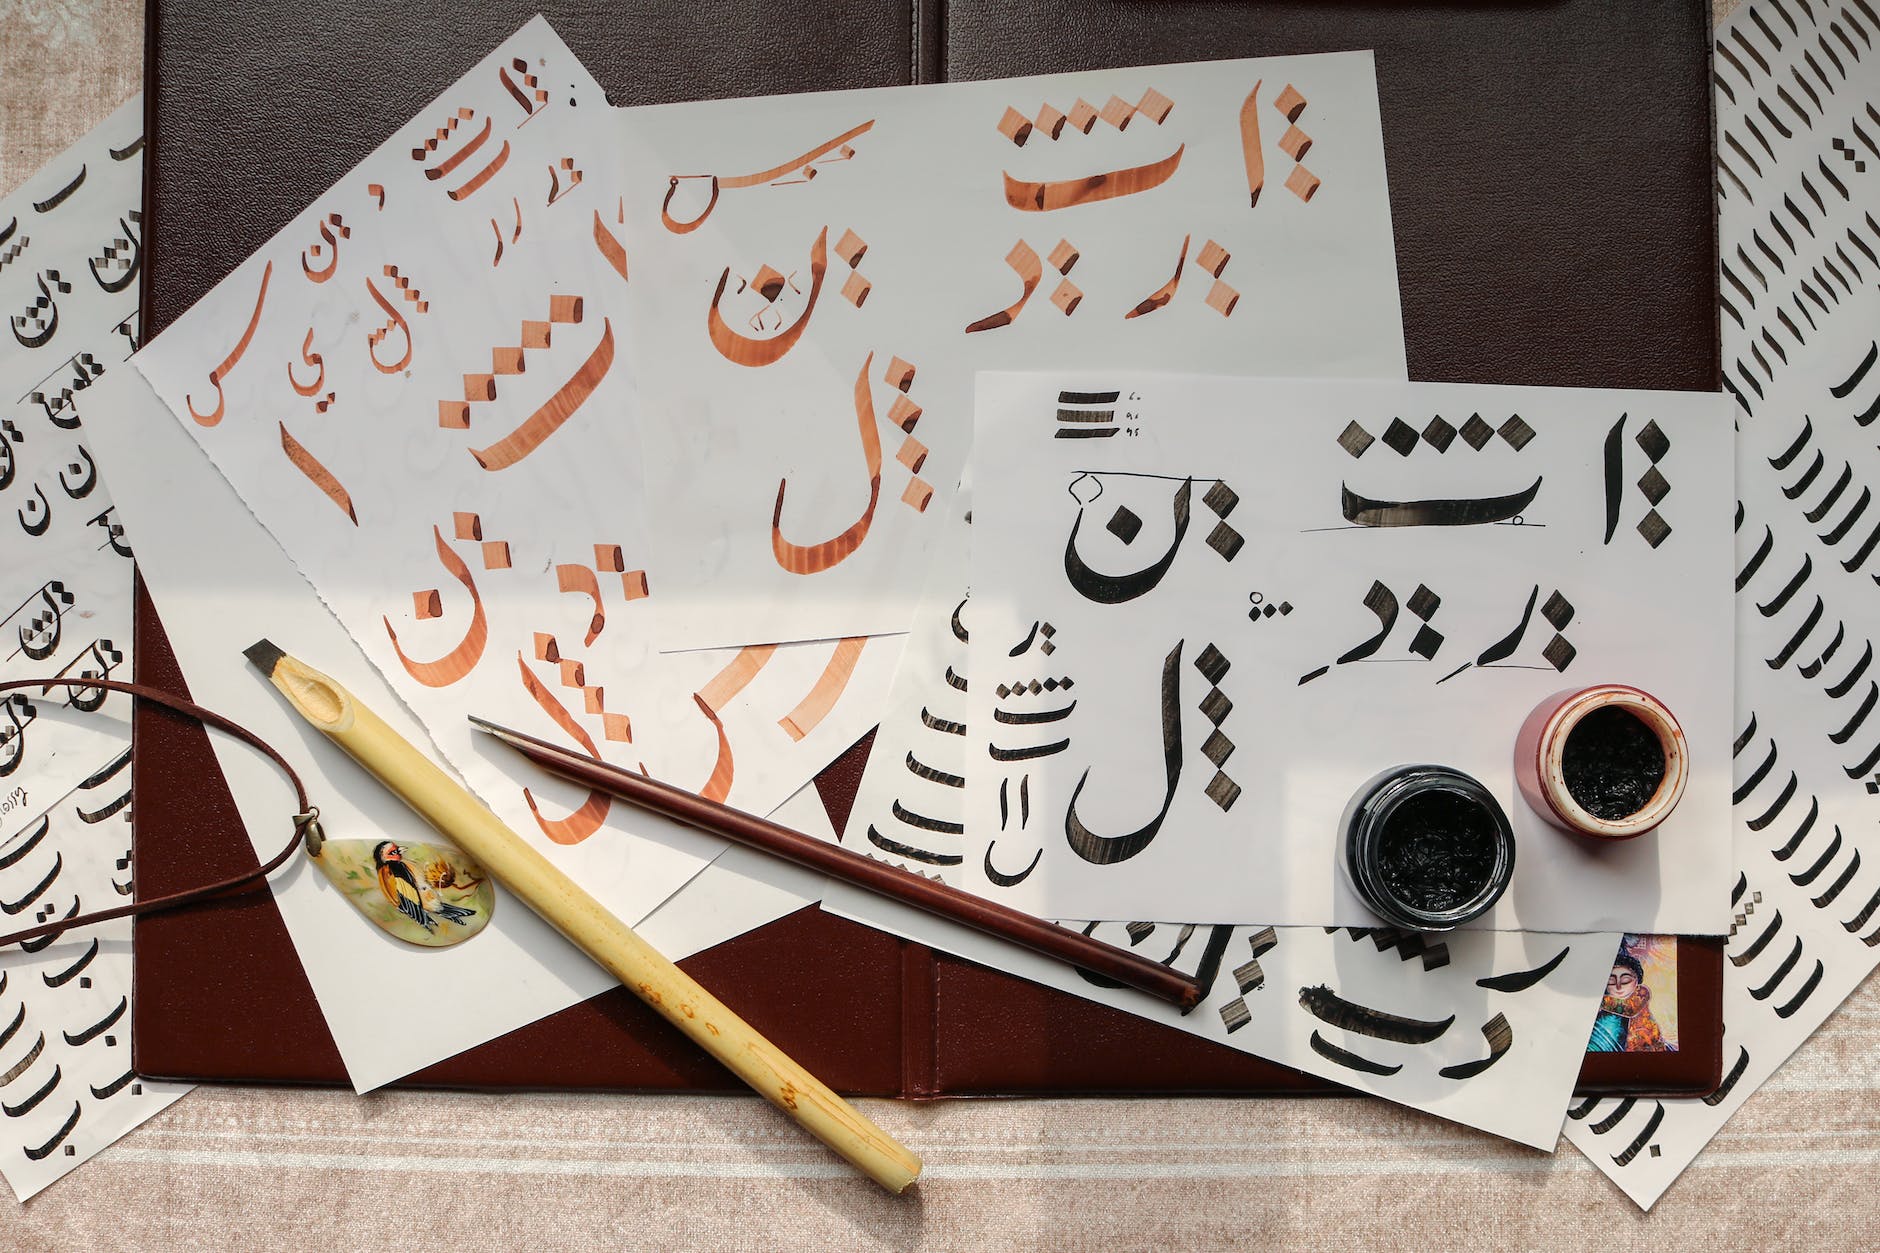 white papers on table with written calligraphy art